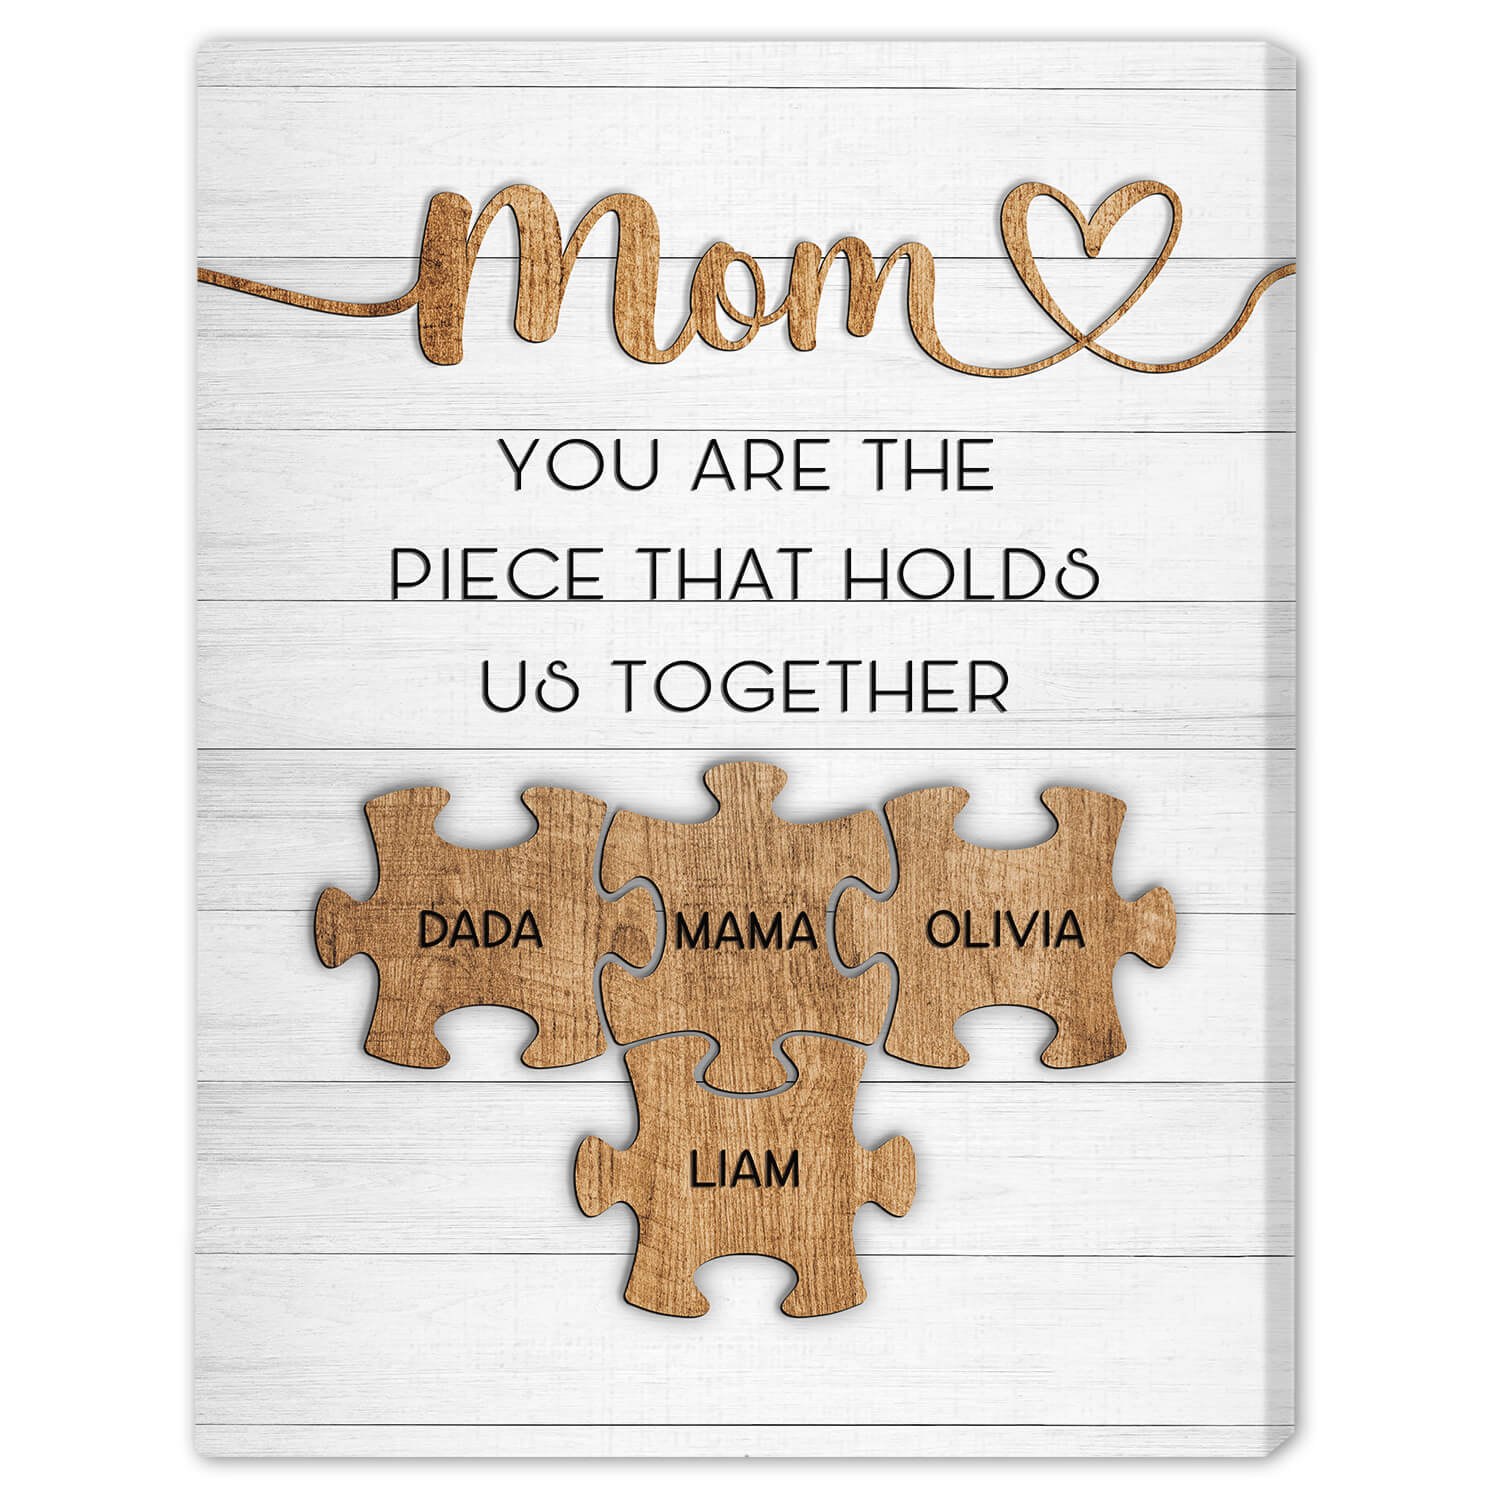 Meaningful Mother Daughter Gifts Mother's Day Personalized Gifts - Oh Canvas